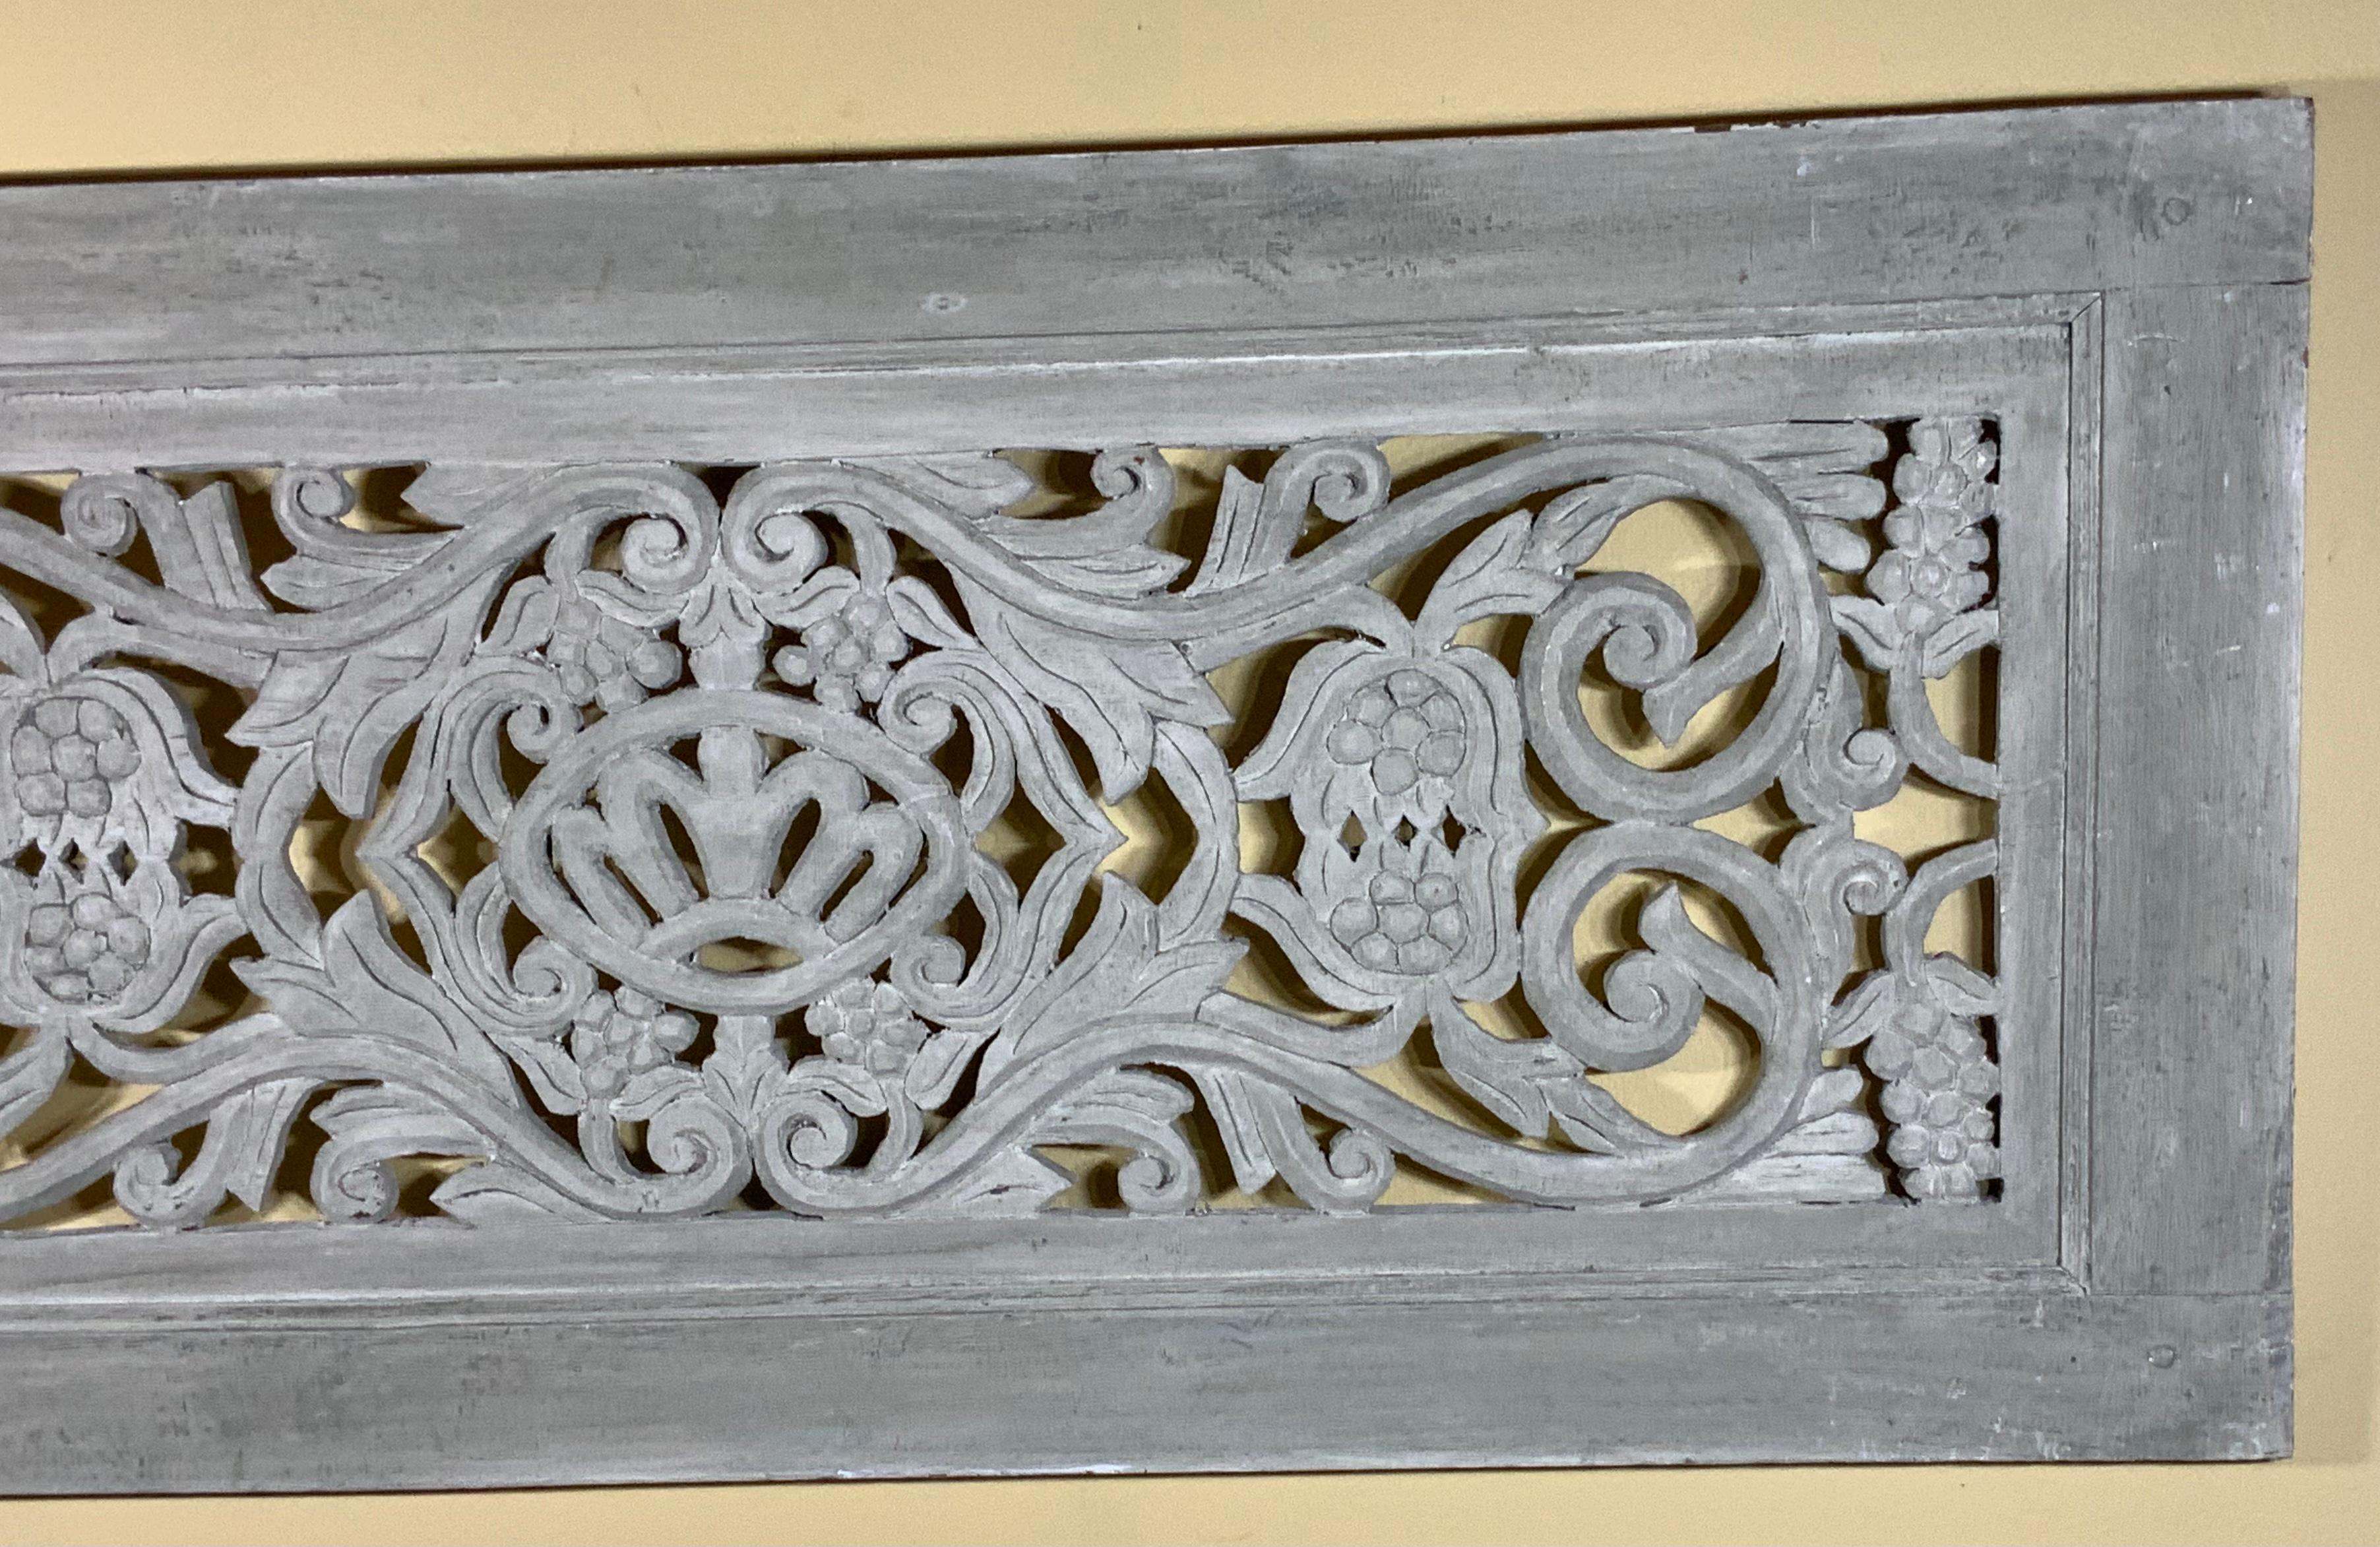 Beautiful hand carving wood wall hanging from solid wood, with vine, crown flowers and motifs, hand painted in gray color. Very impressive wall hanging.